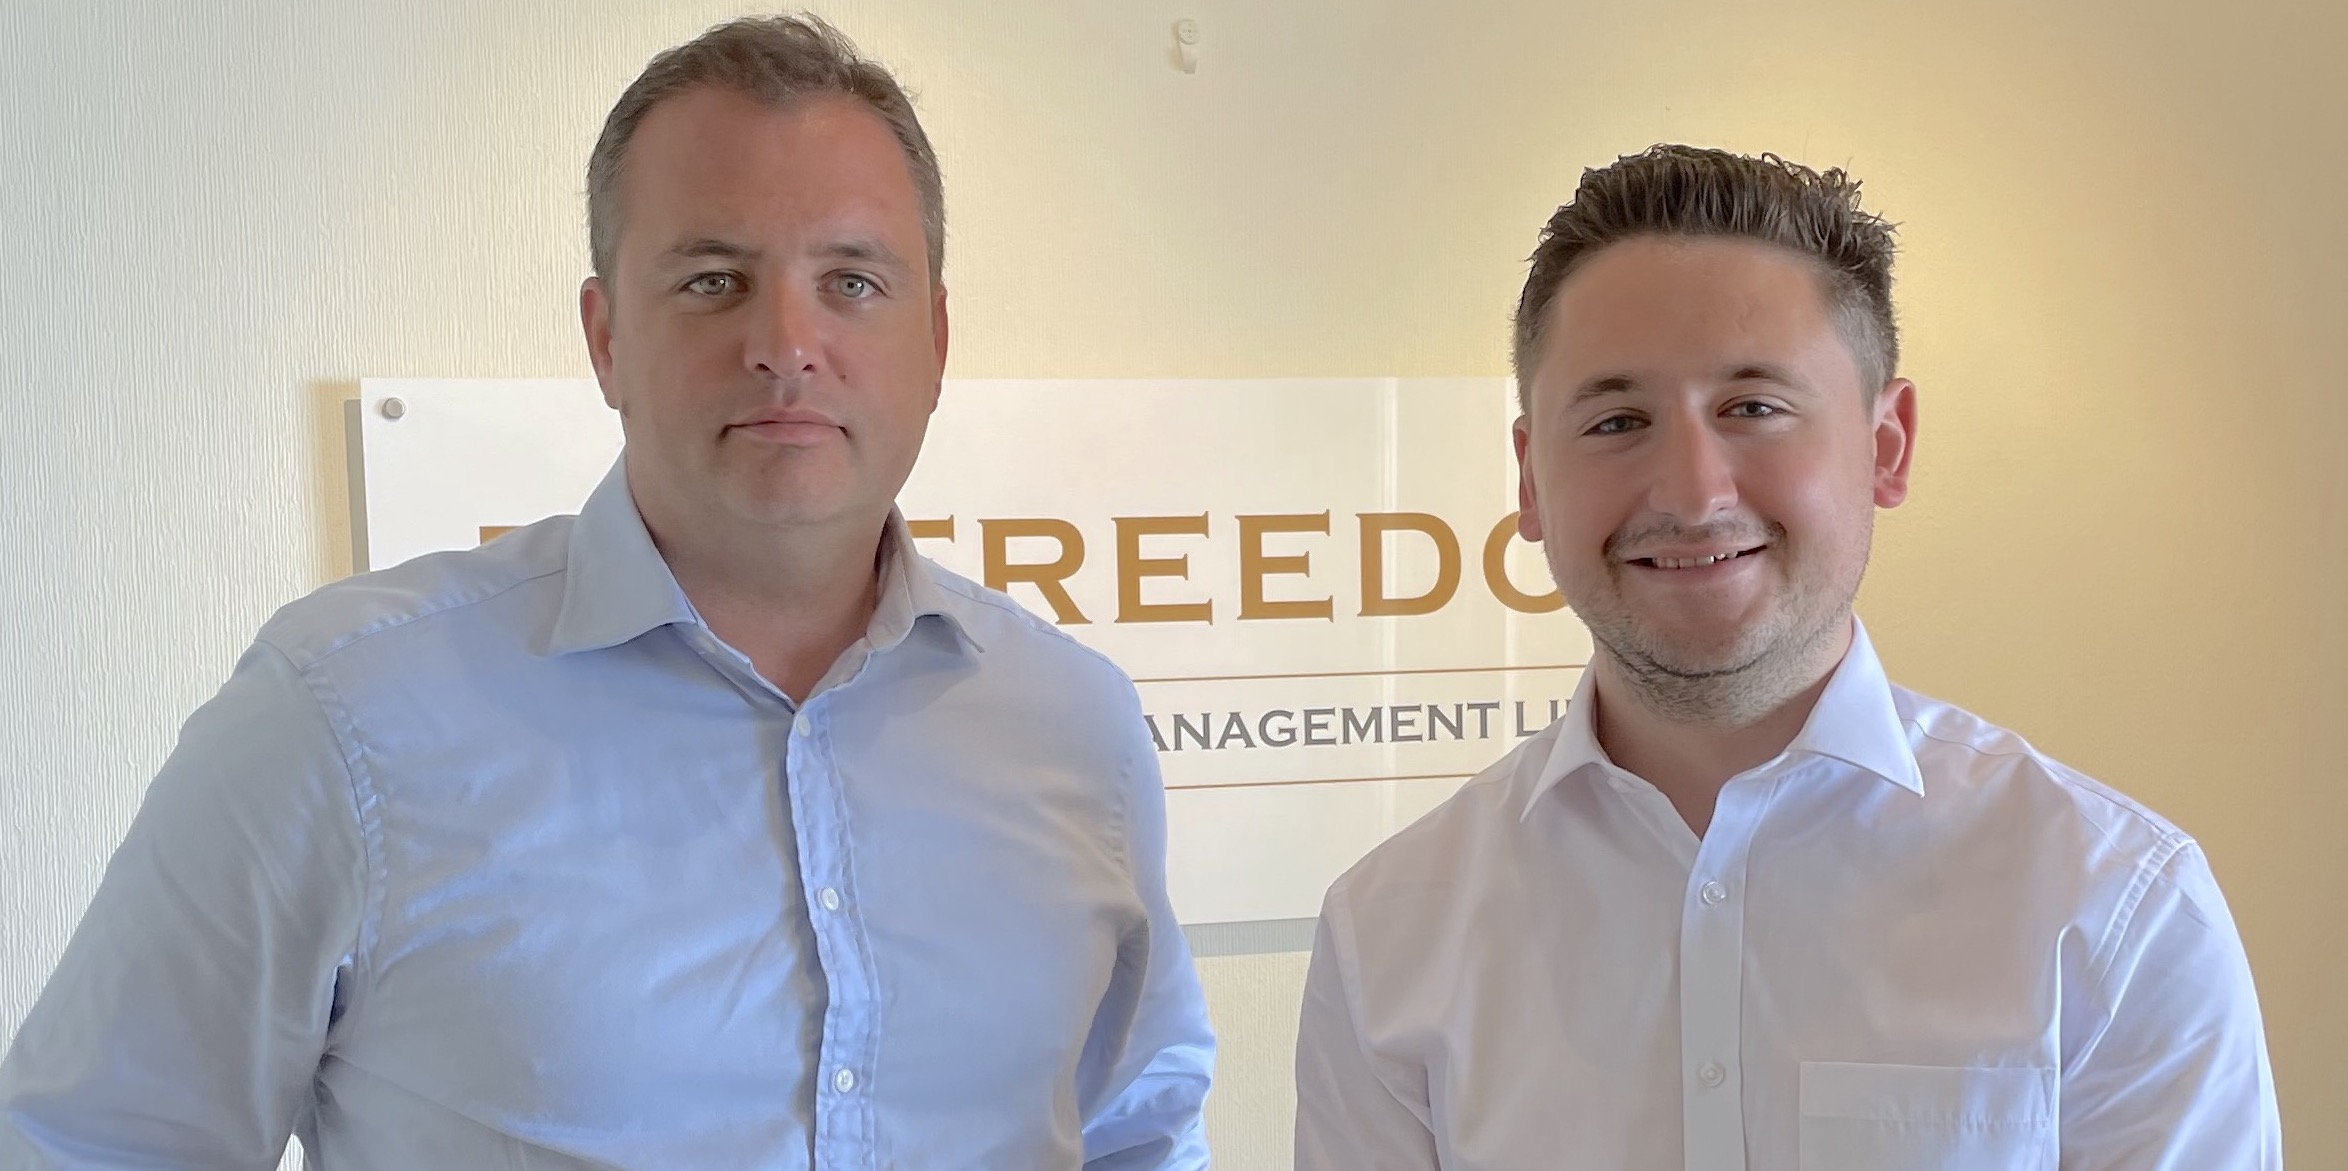 Freedom Asset Management Limited announces several new hires in Guernsey